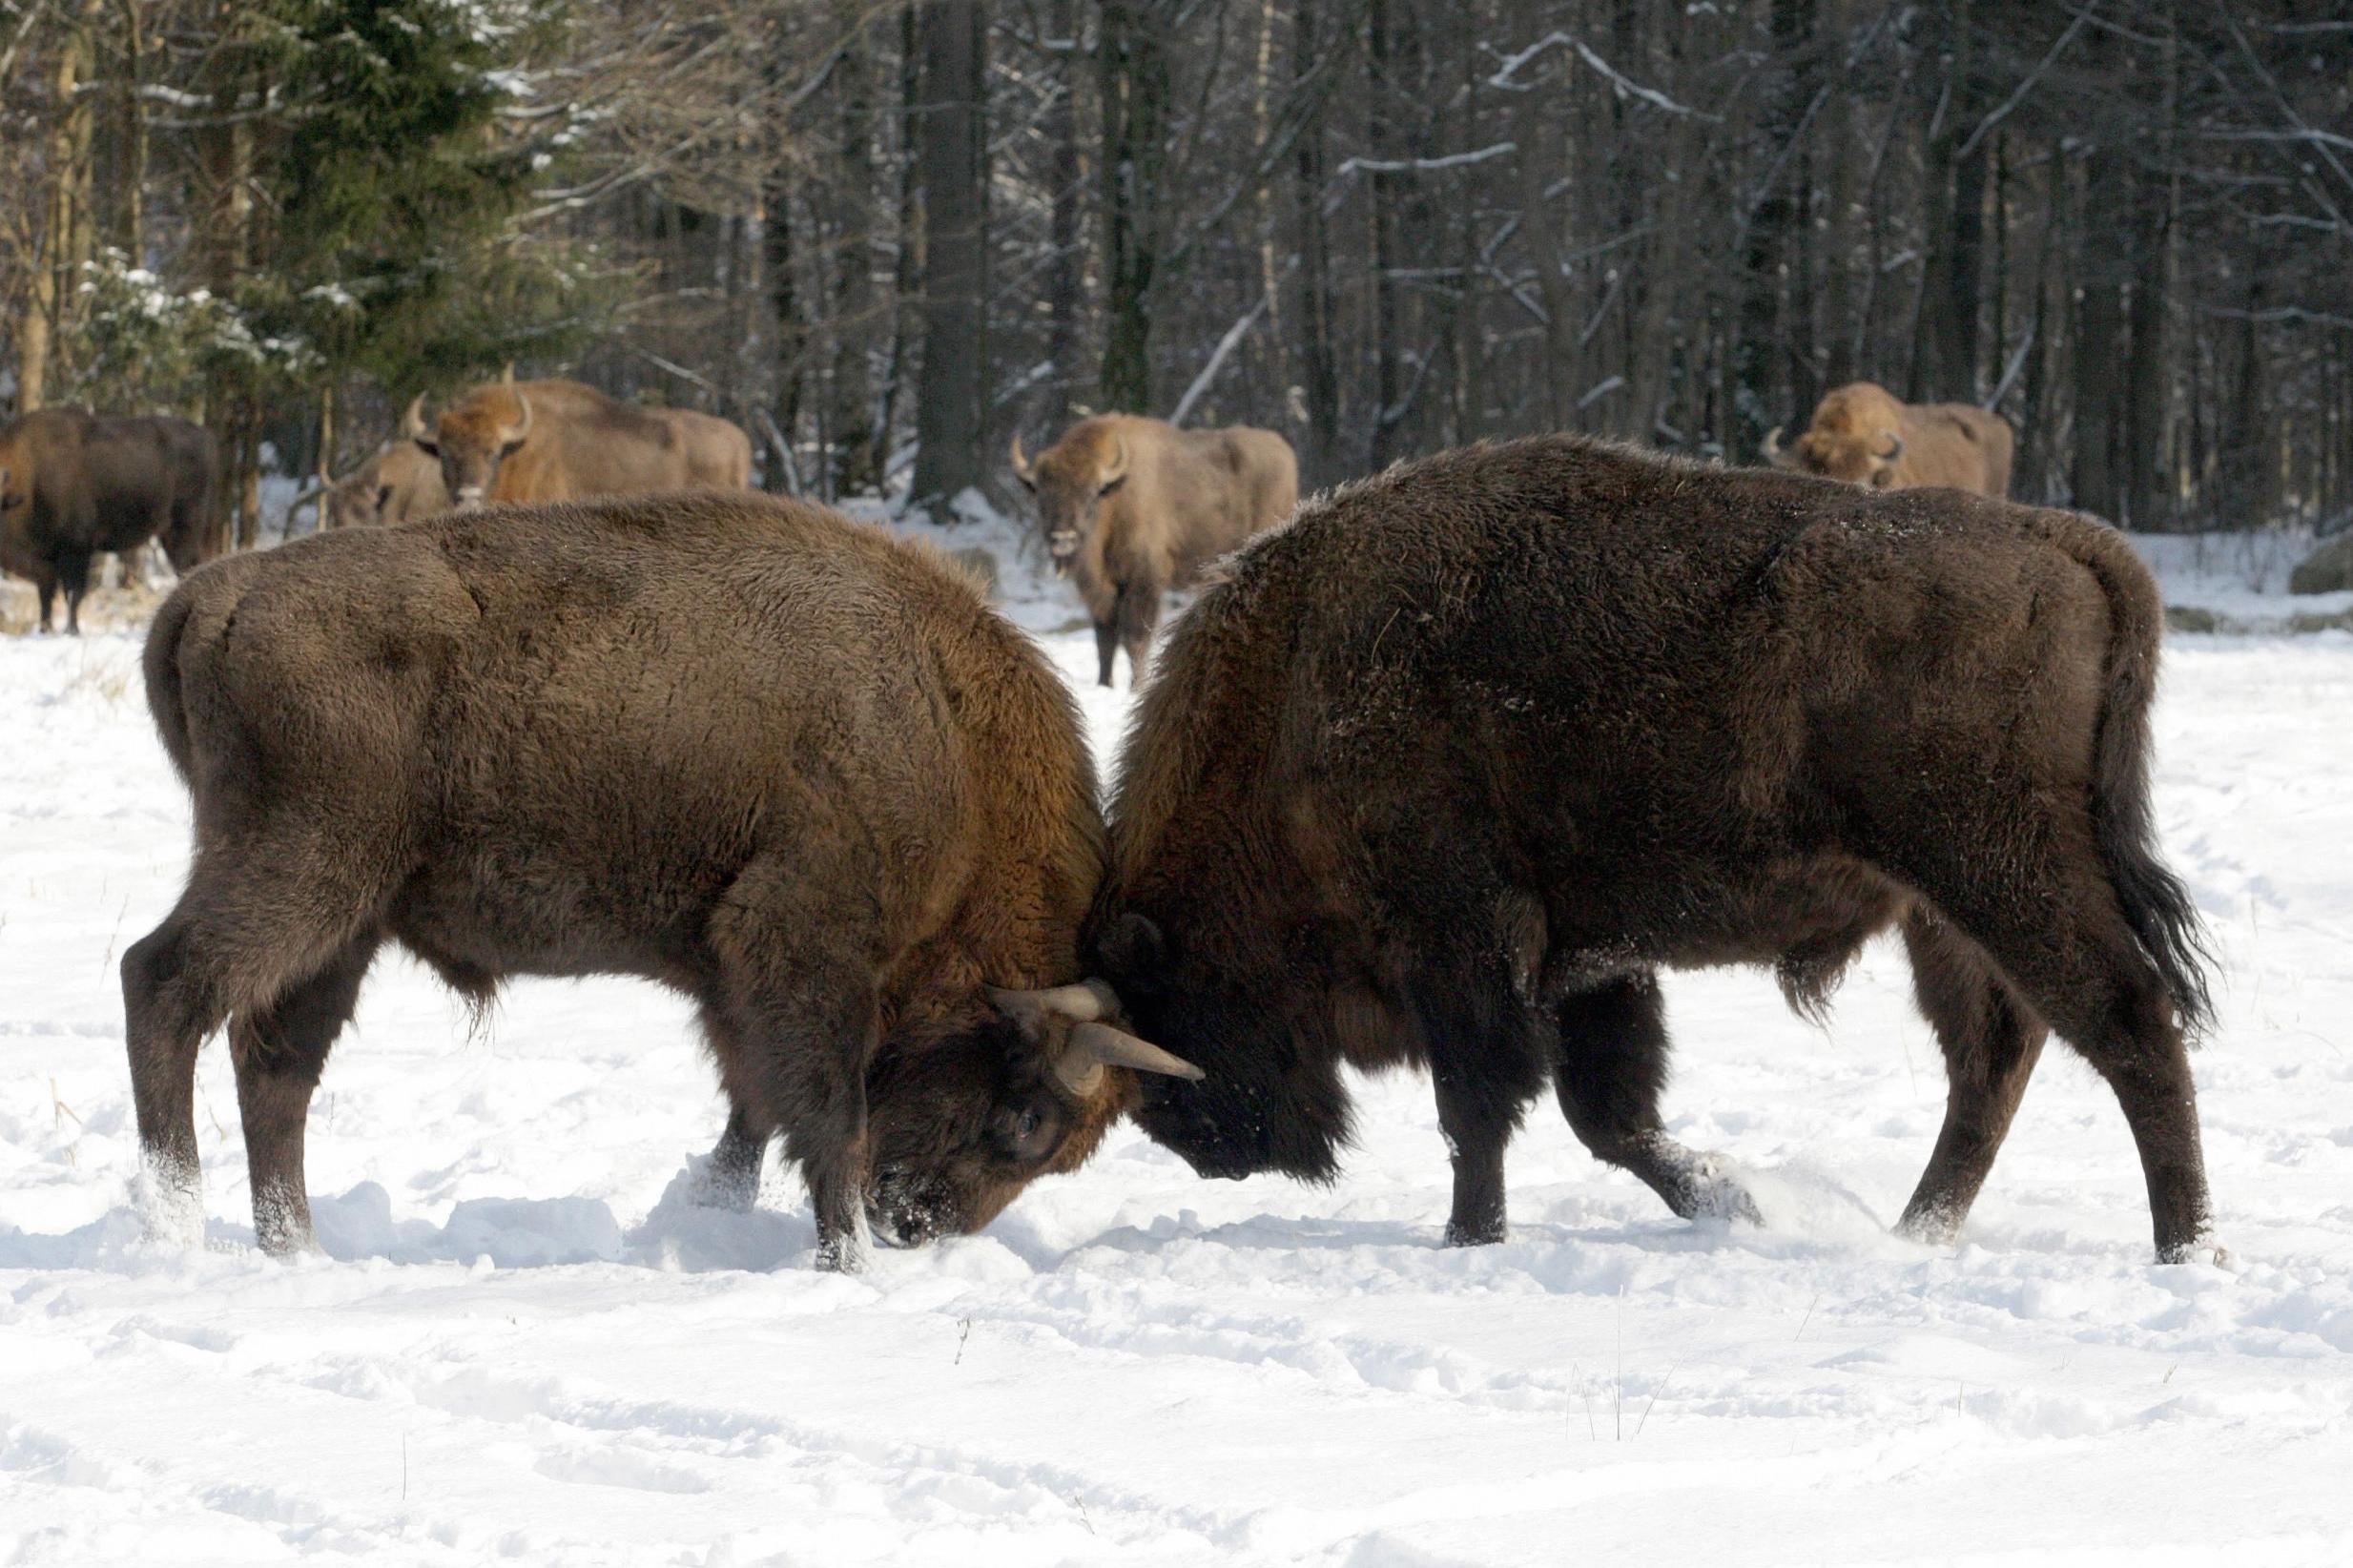 Two bison lock horns at the Bialowieza National Park (AFP/Getty)